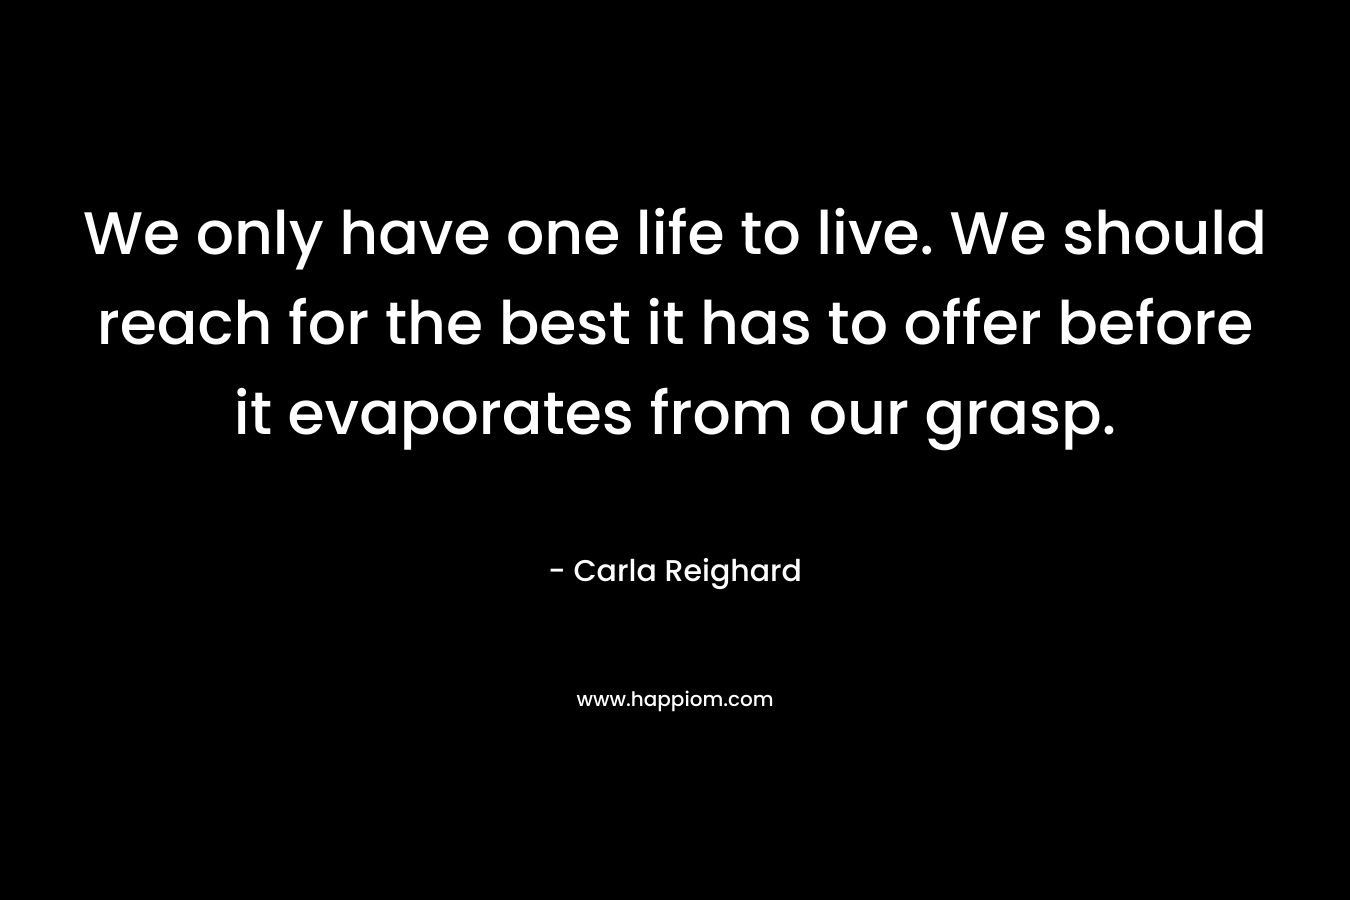 We only have one life to live. We should reach for the best it has to offer before it evaporates from our grasp. – Carla Reighard